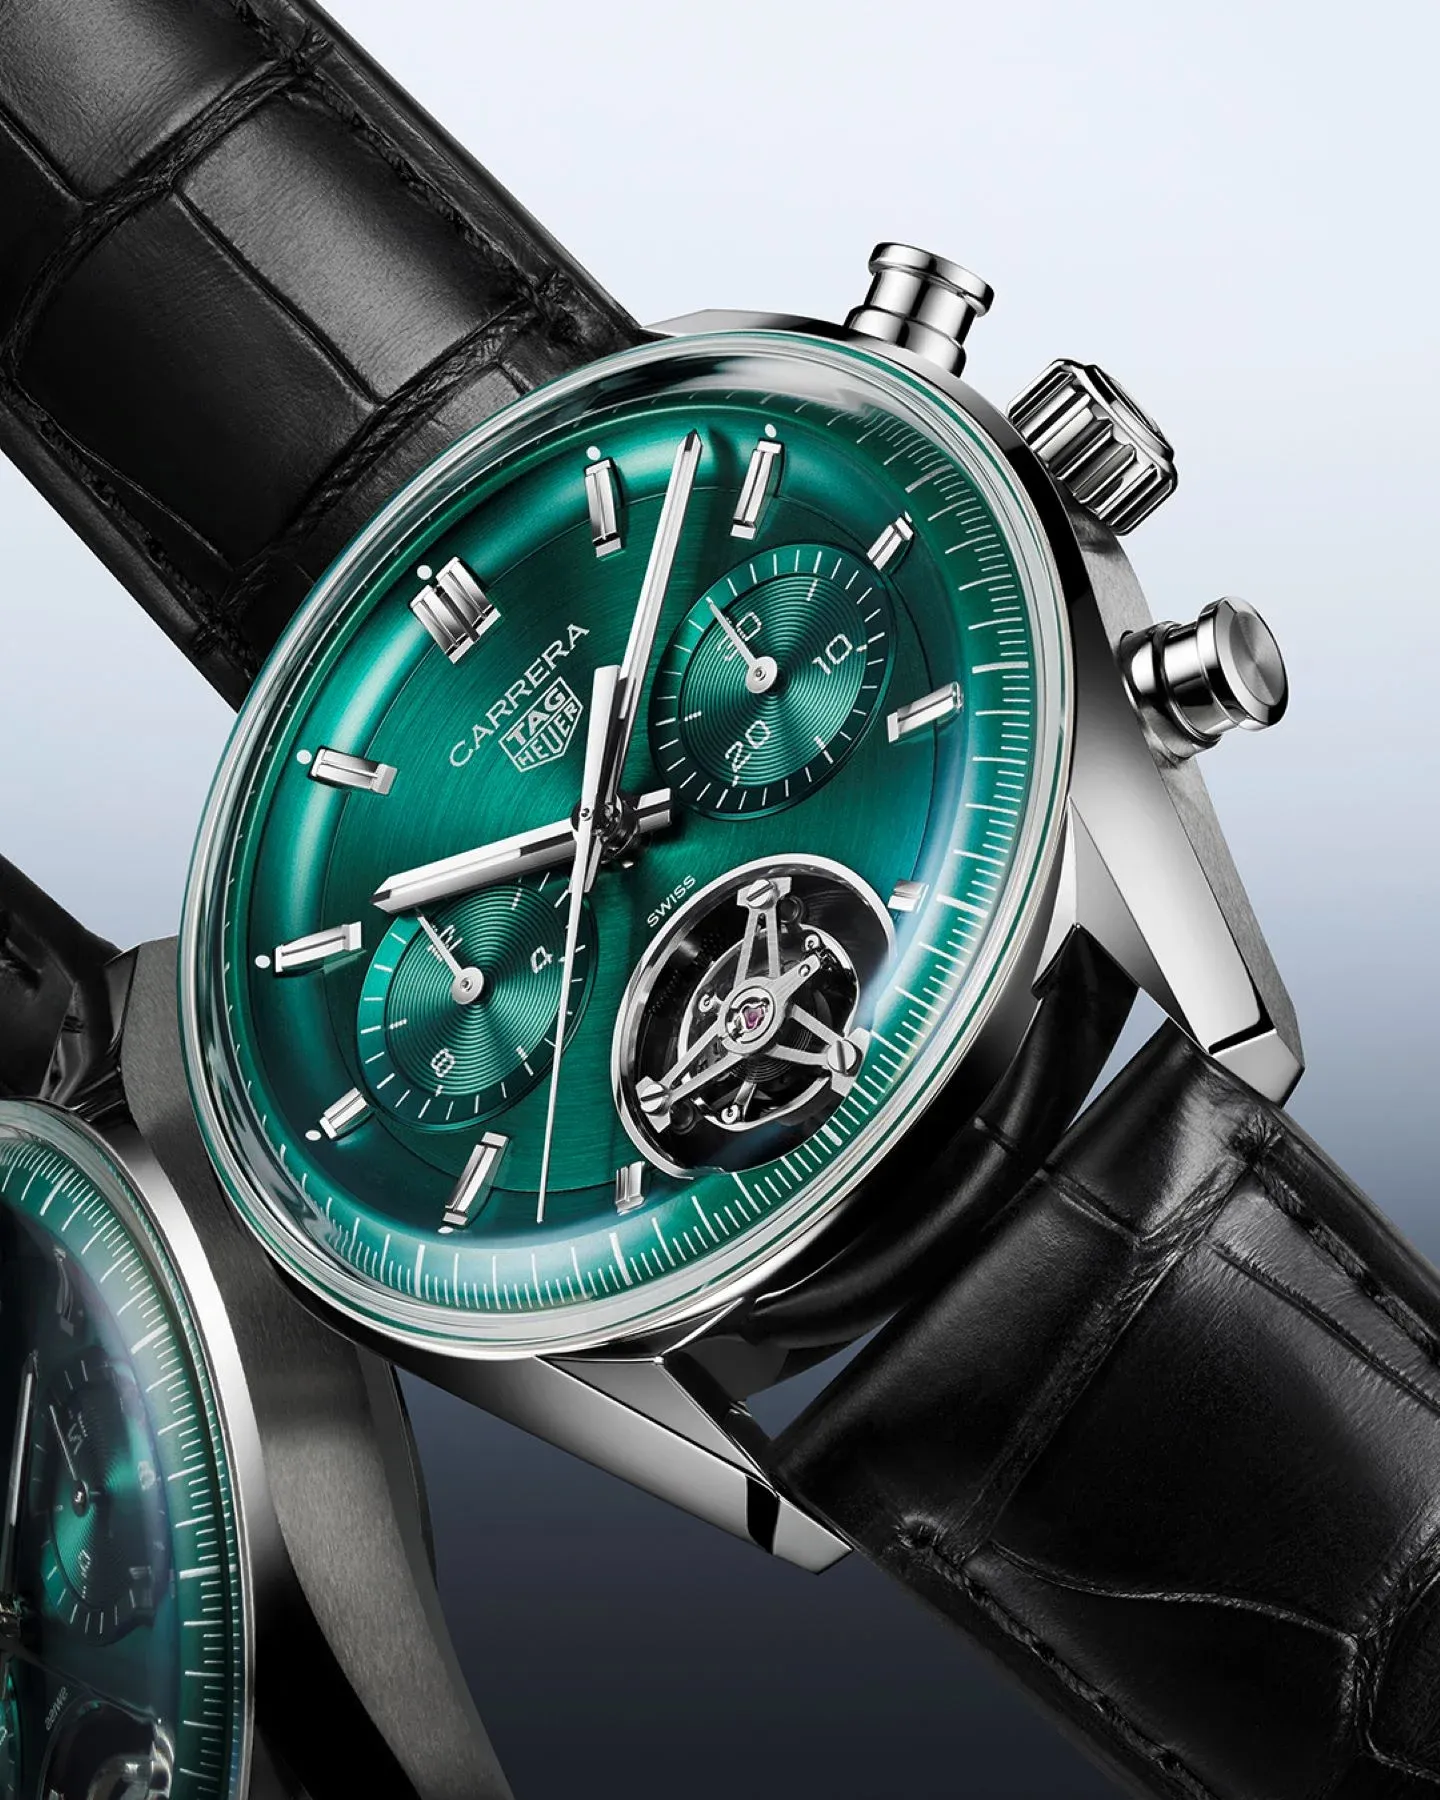 The watch features an elegant teal green circular brushed dial